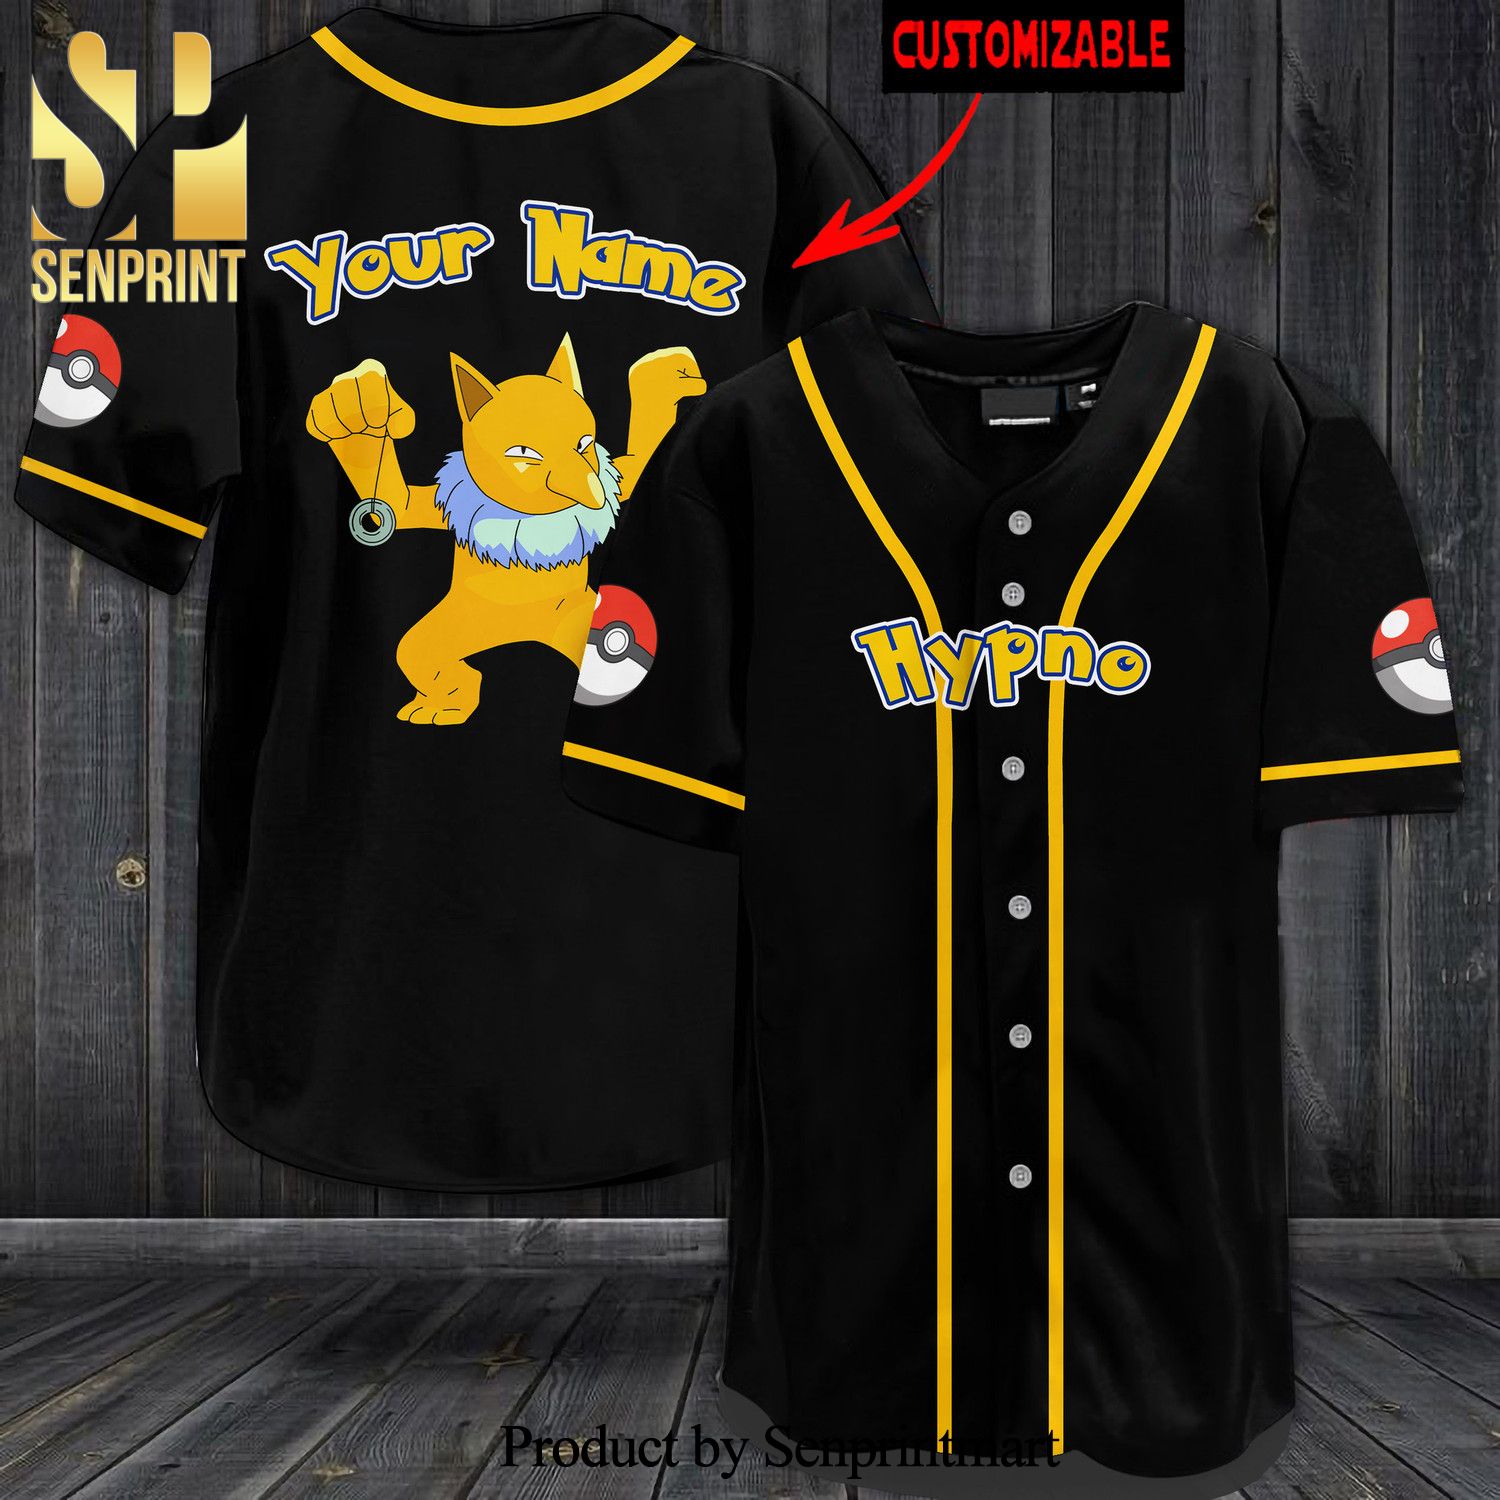 Personalized Hypno All Over Print Baseball Jersey – Black